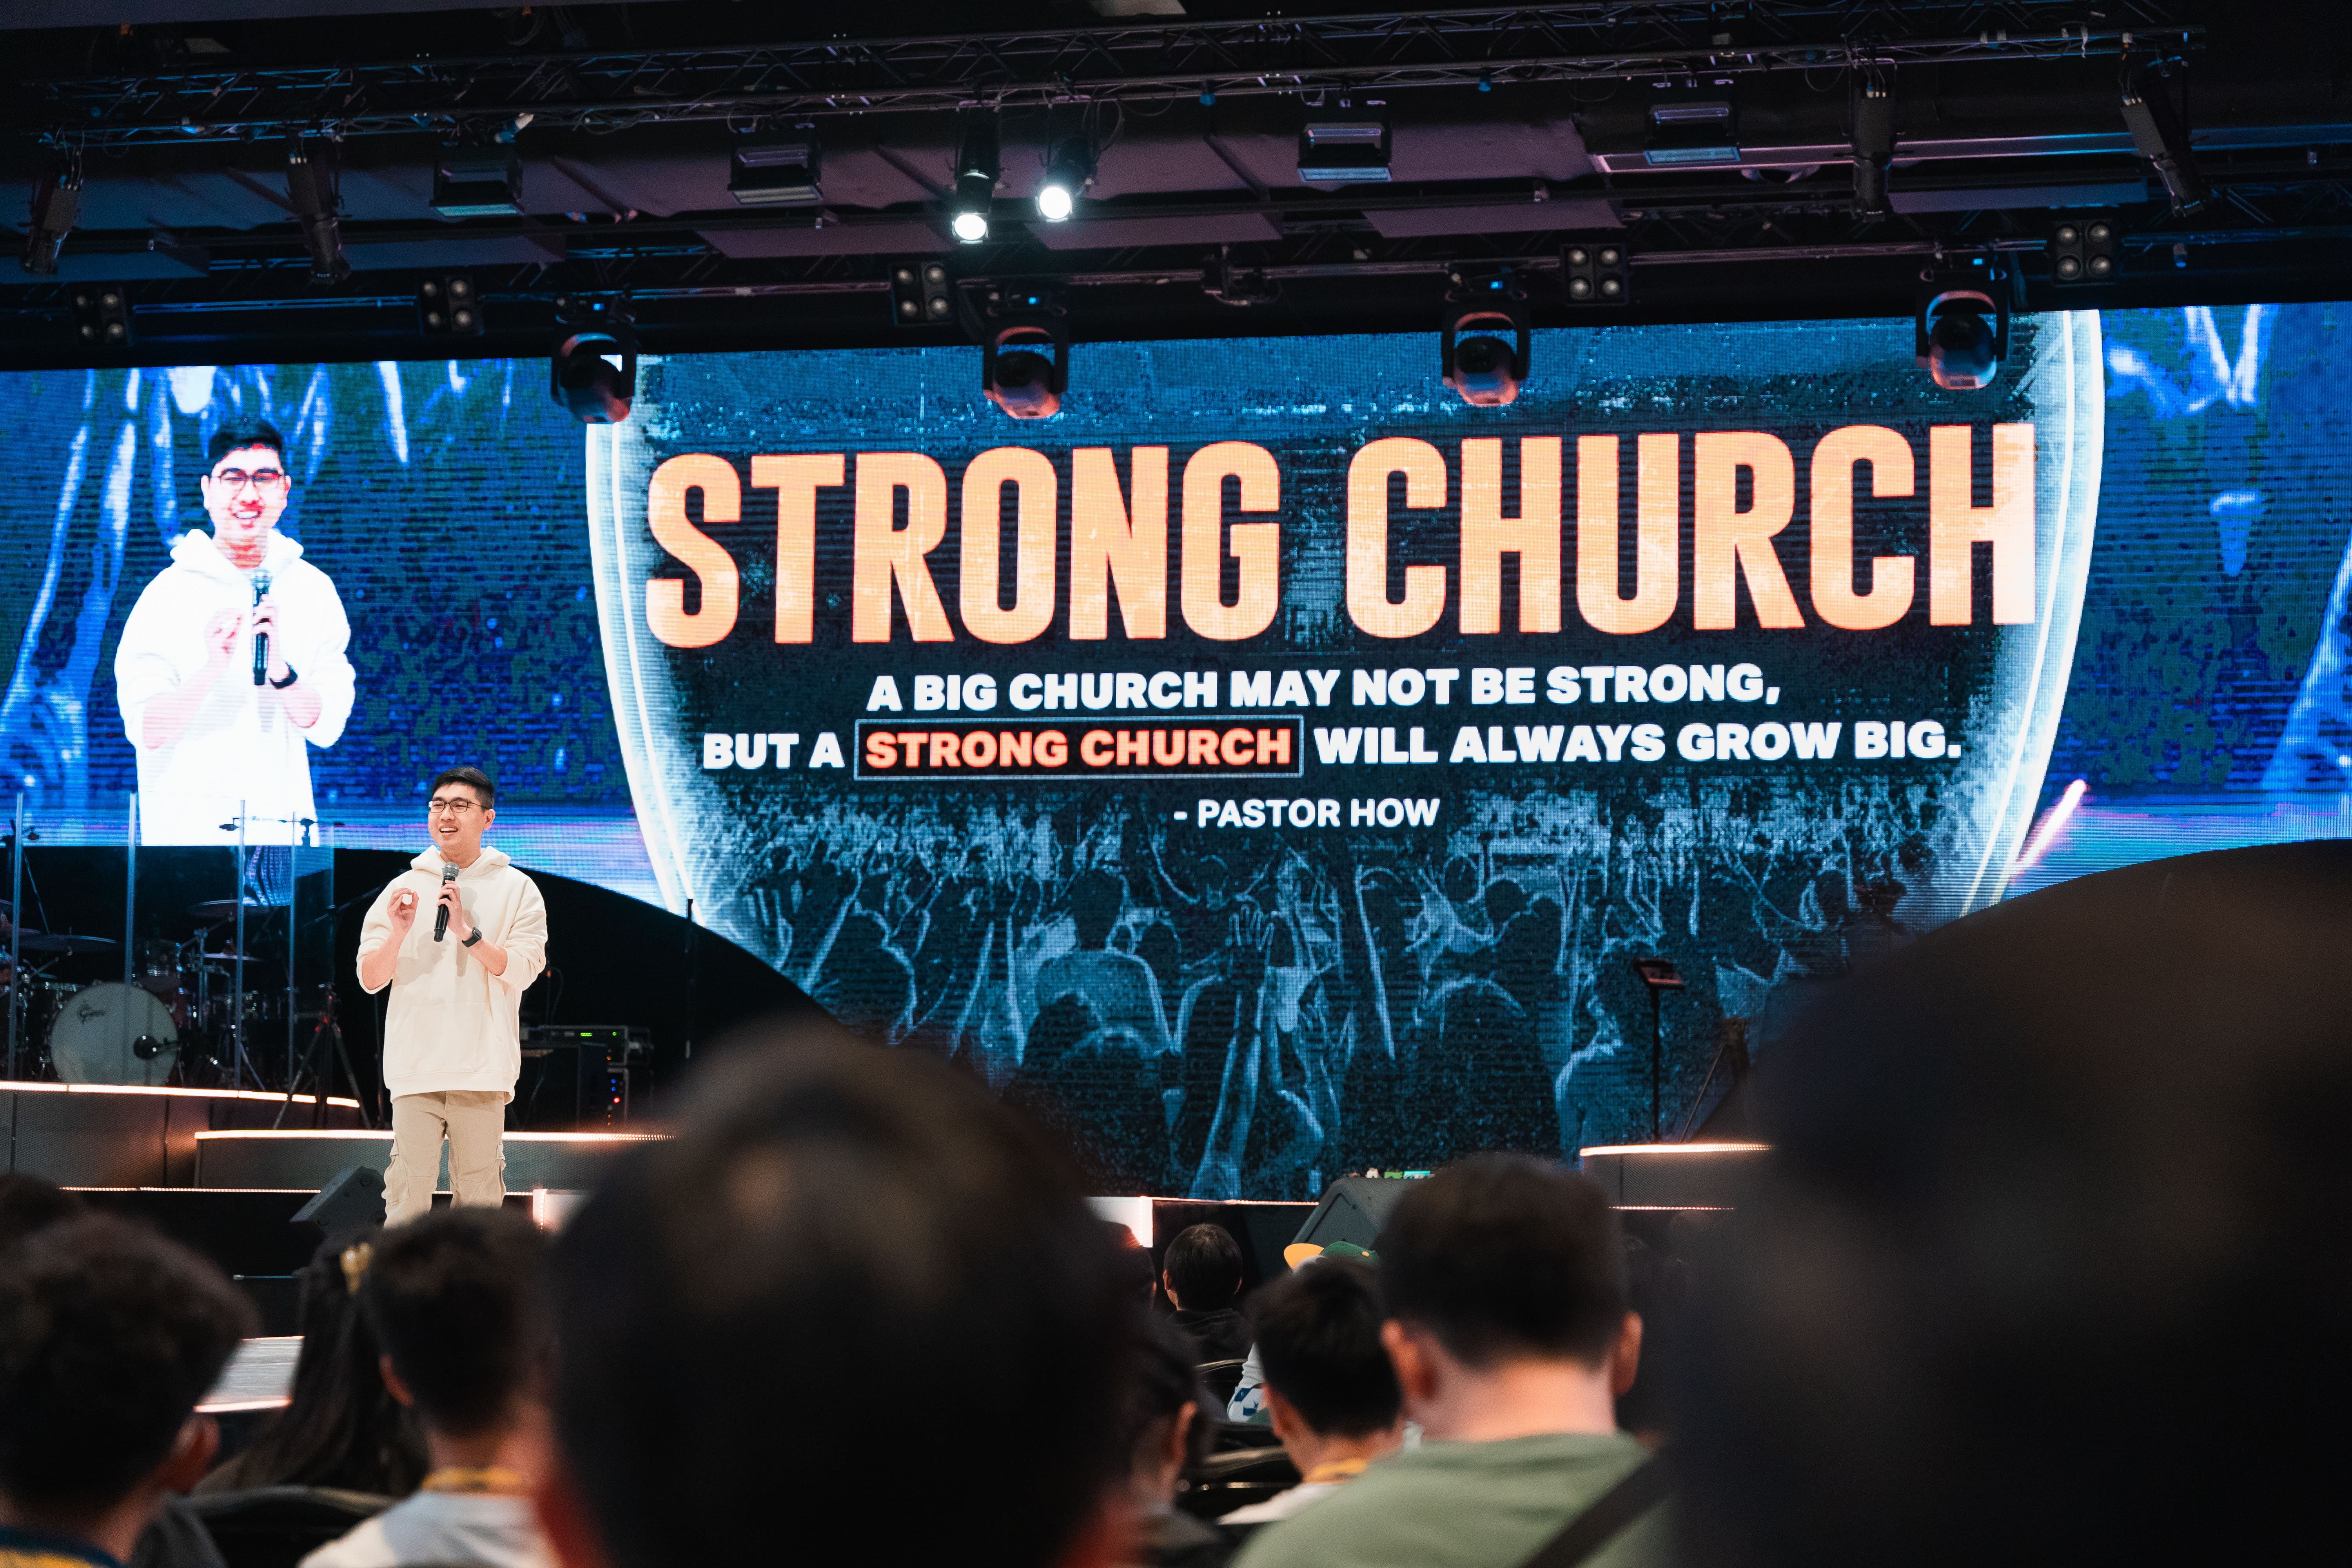 Senior Pastor Garrett sharing about GenerationS and Strong Church at GenerationS Pastors Conference in Heart of God Church Singapore